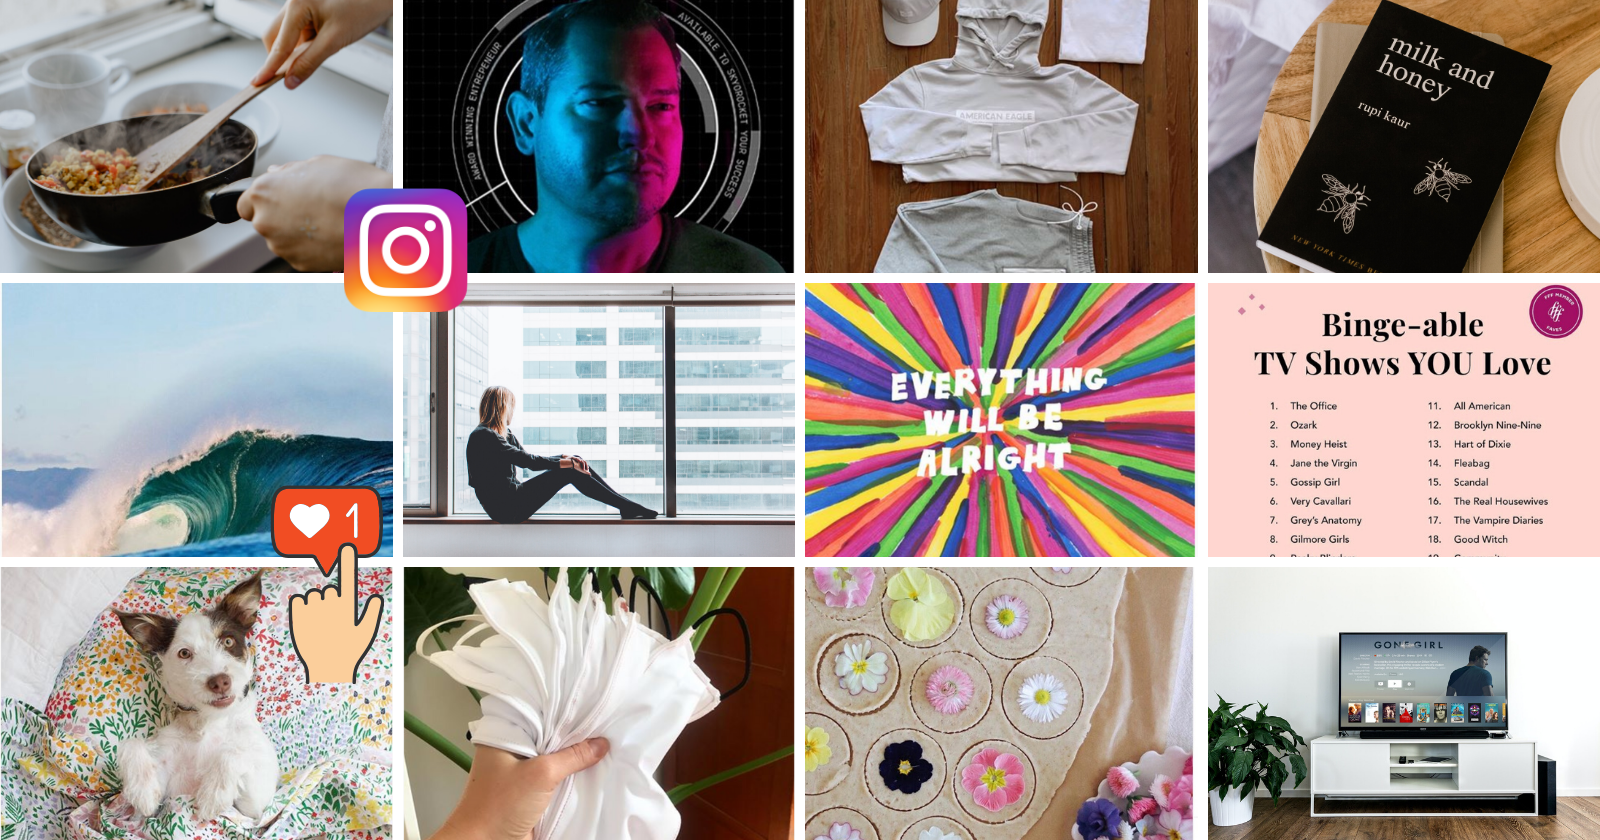 How Brands Should Use Instagram PR During Work-From-Home Mode